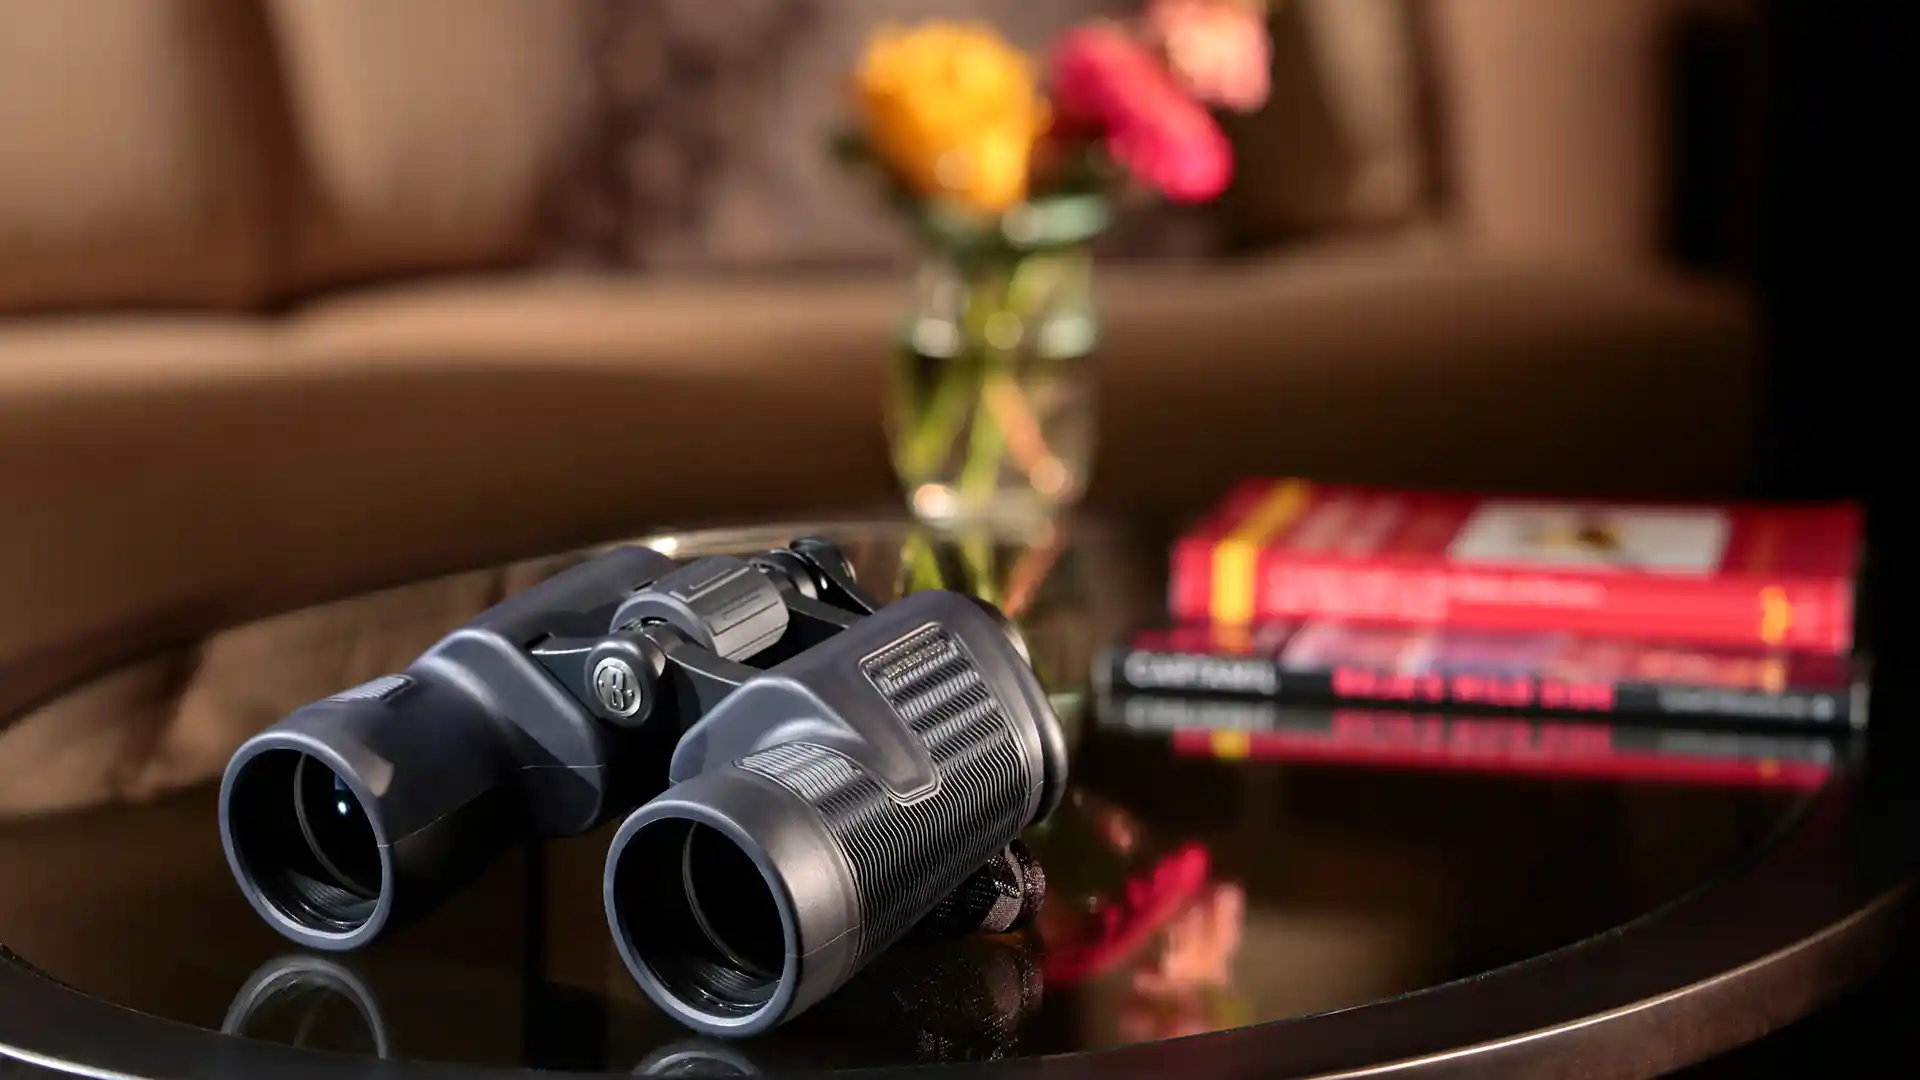 Binoculars on table with flowers and books blurred in background.